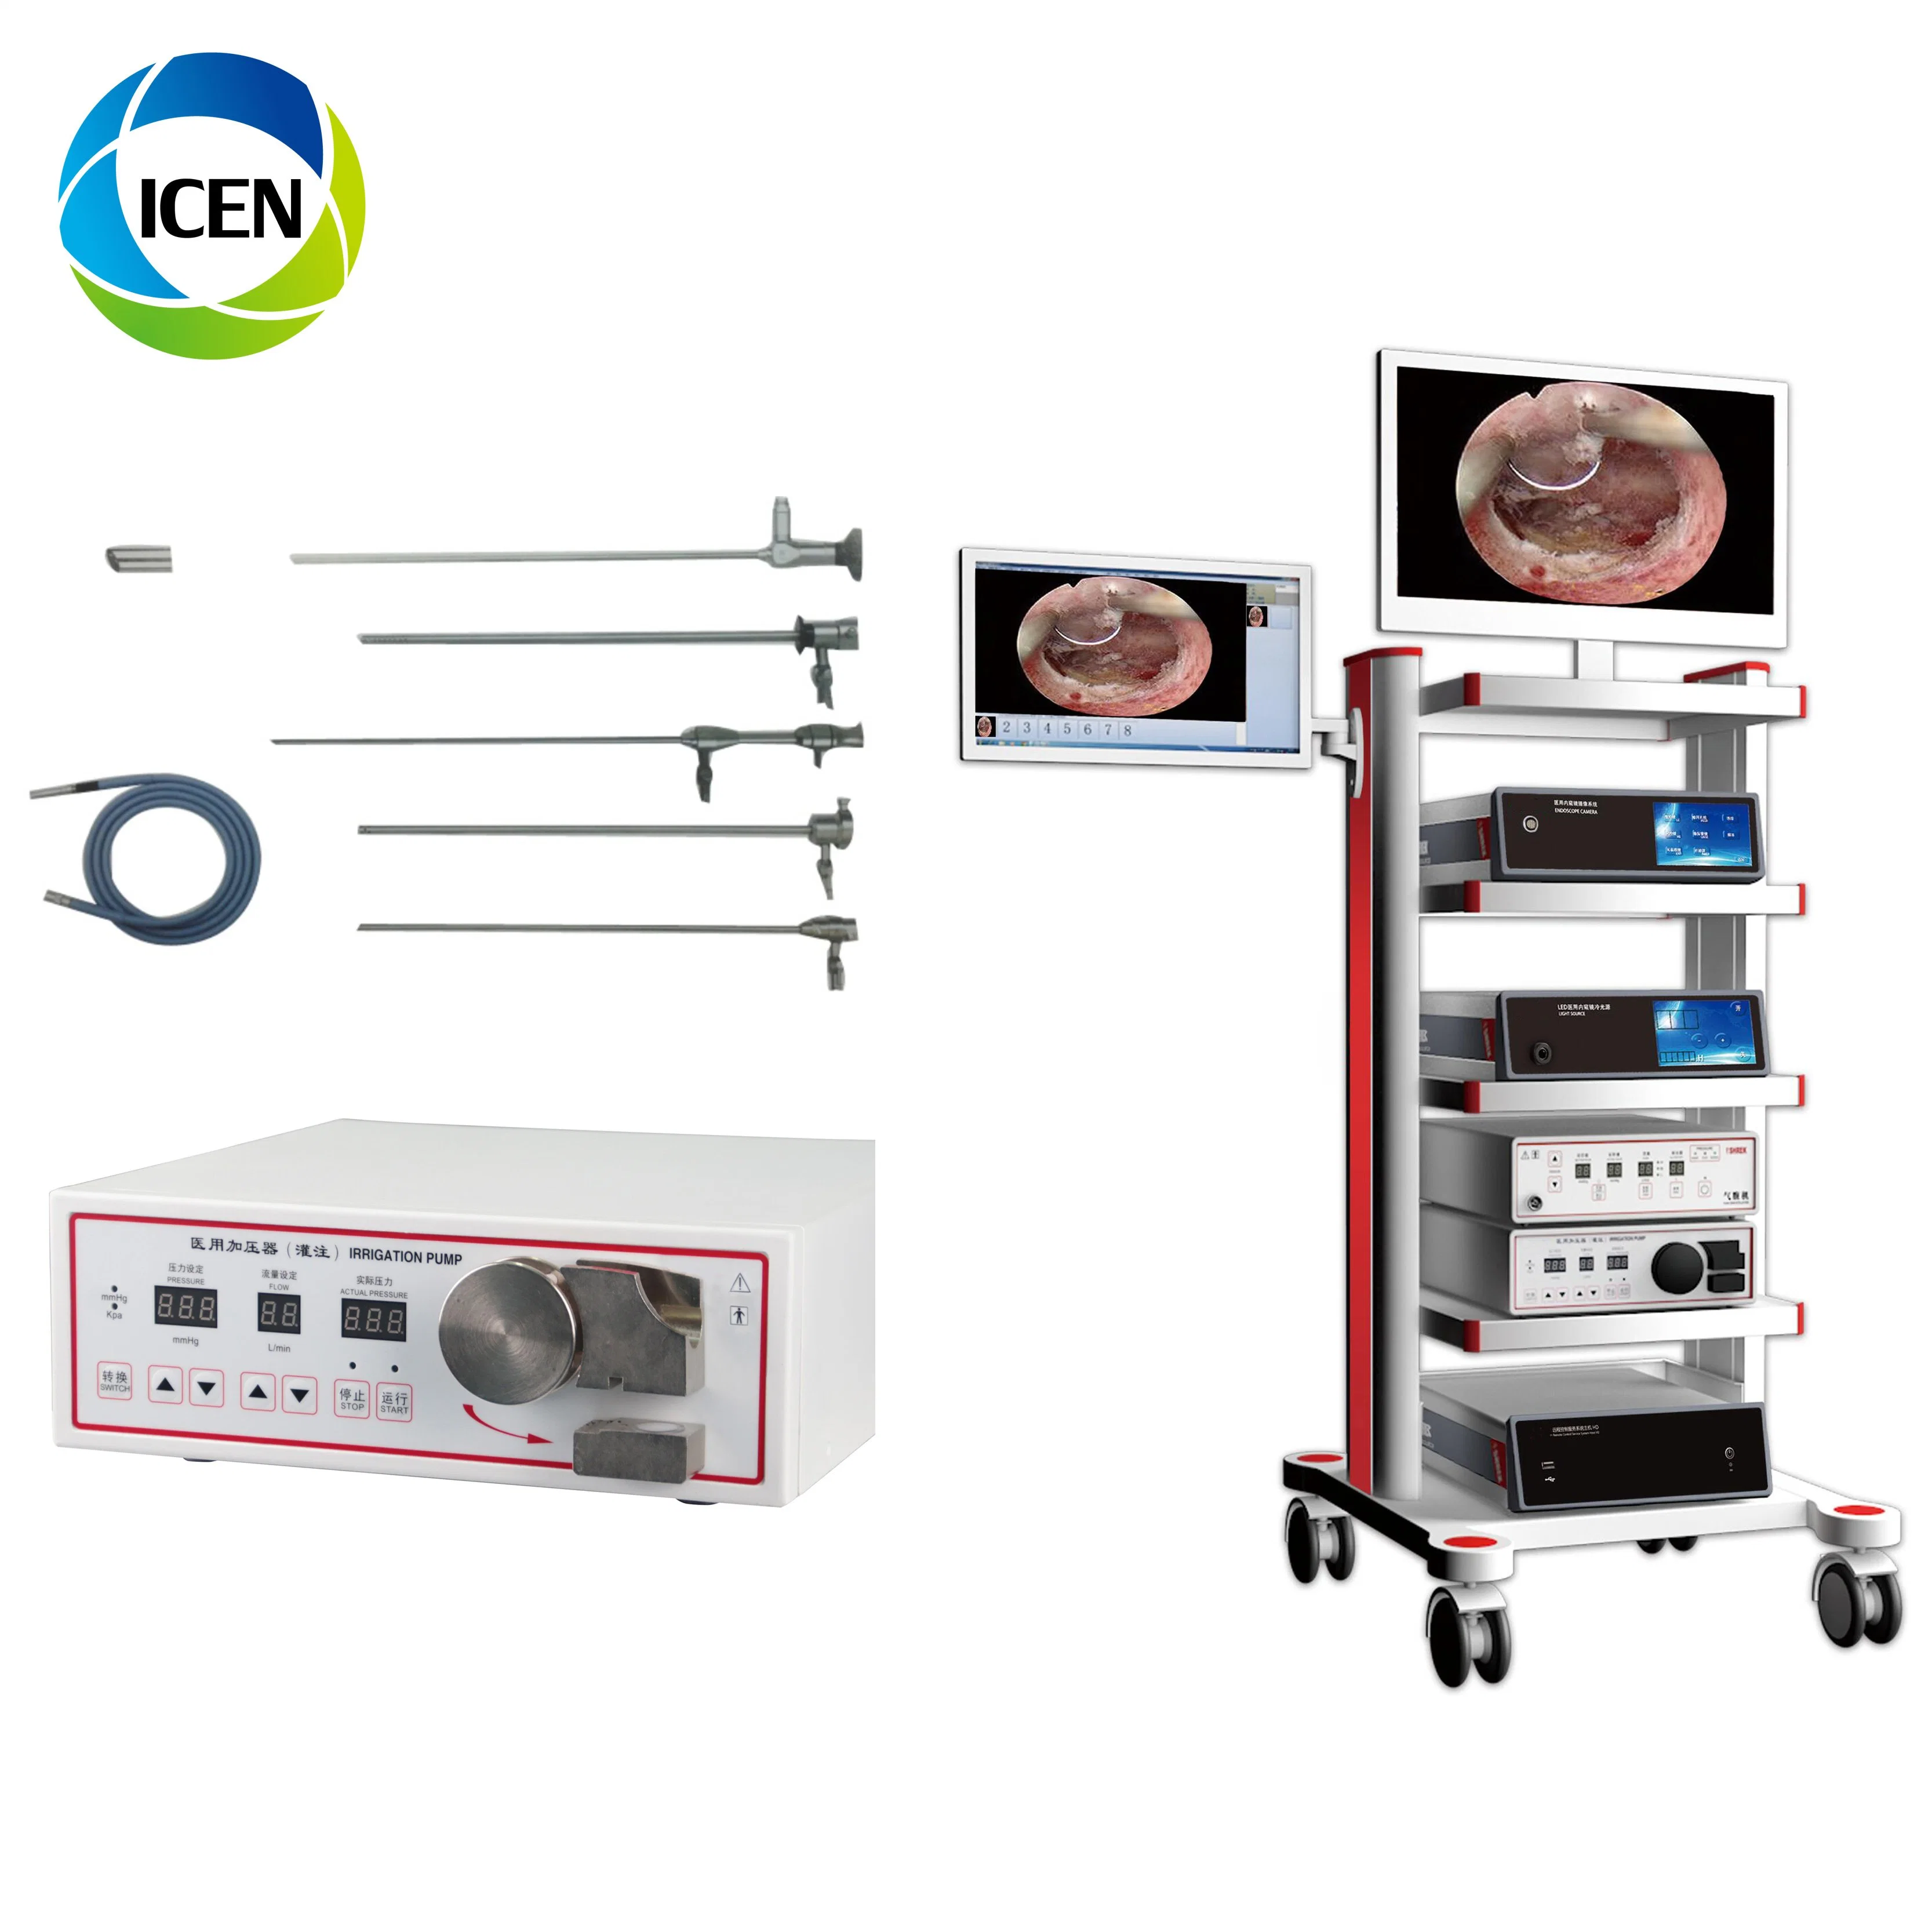 IN-P001 Gynecology Complete HD Camera Endoscopic Hysteroscopy Set